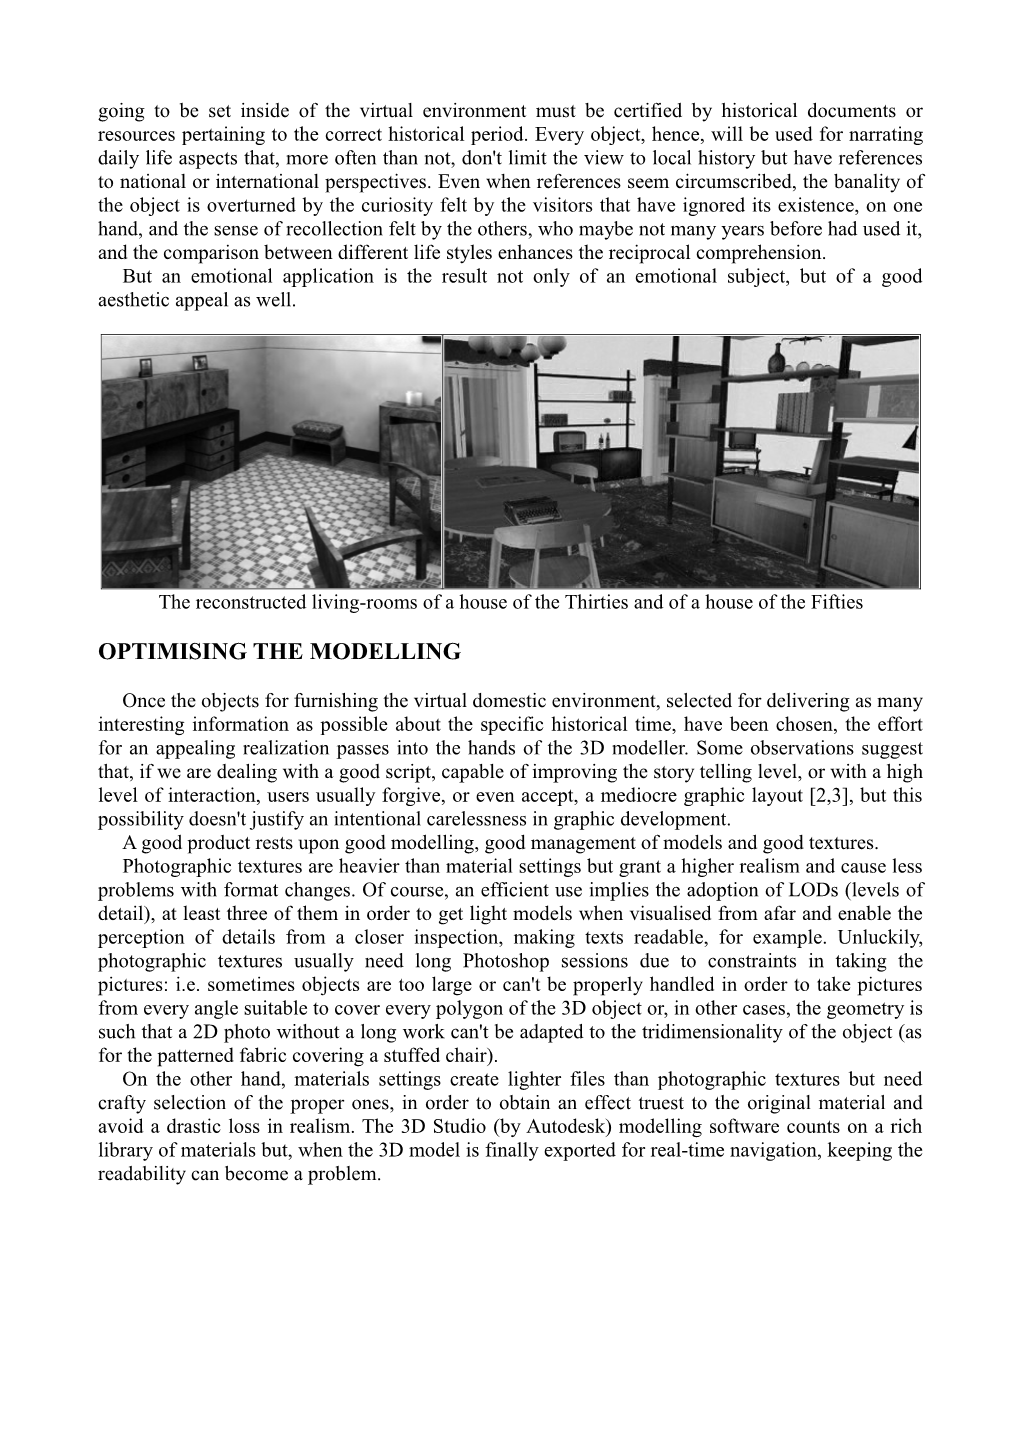 Virtual Domestic Environments and Historical Narration: a Methodological Hypothesis